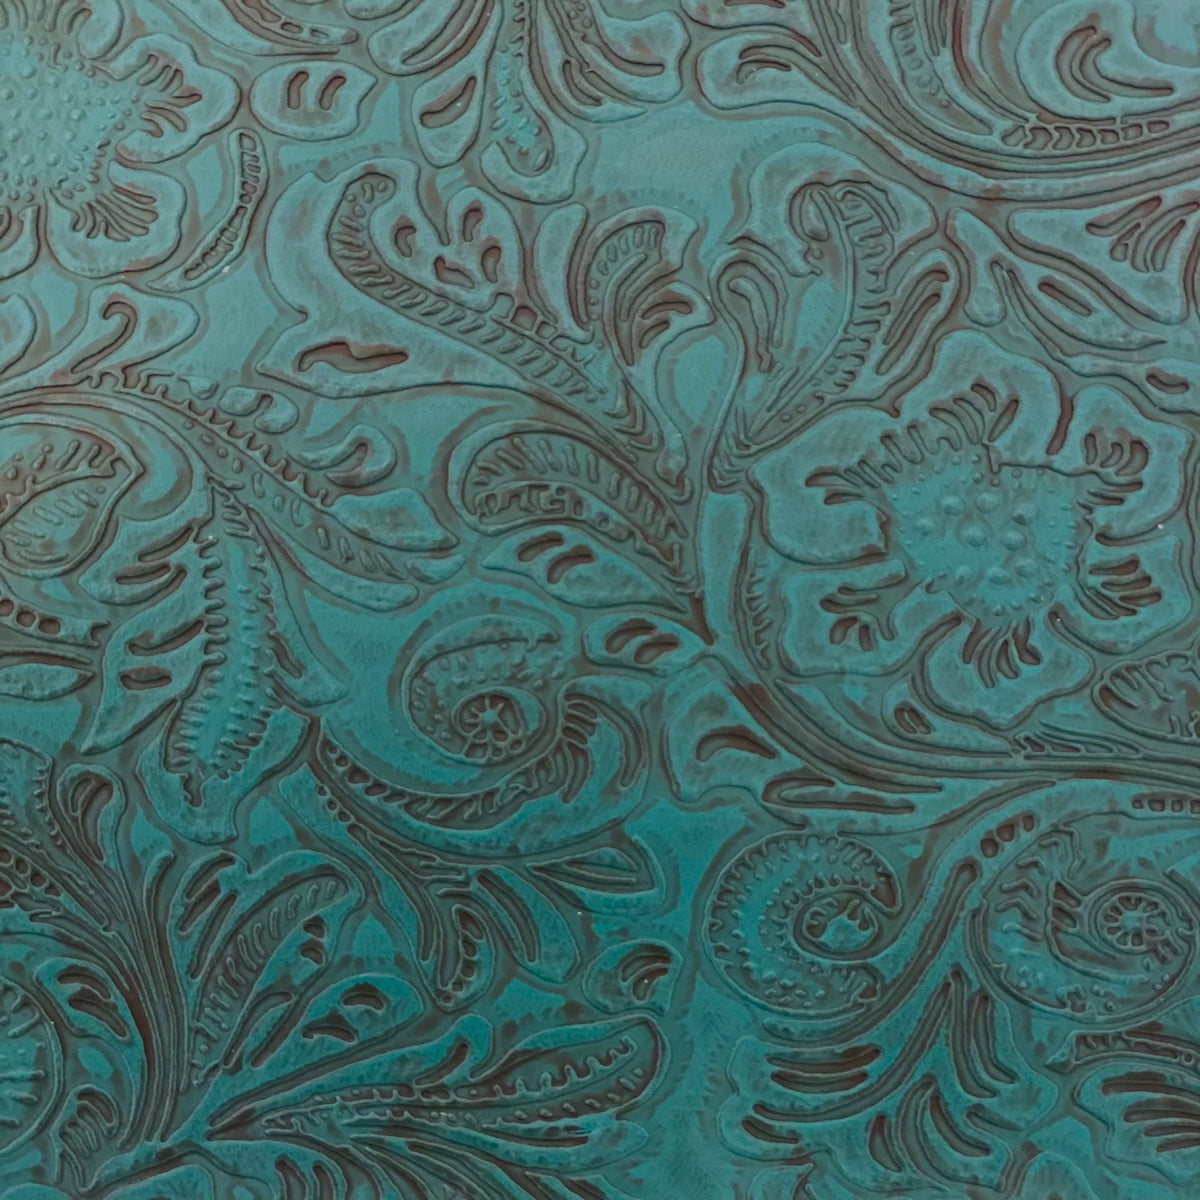 Turquoise Blue Western Floral PU Faux Leather Vinyl Fabric